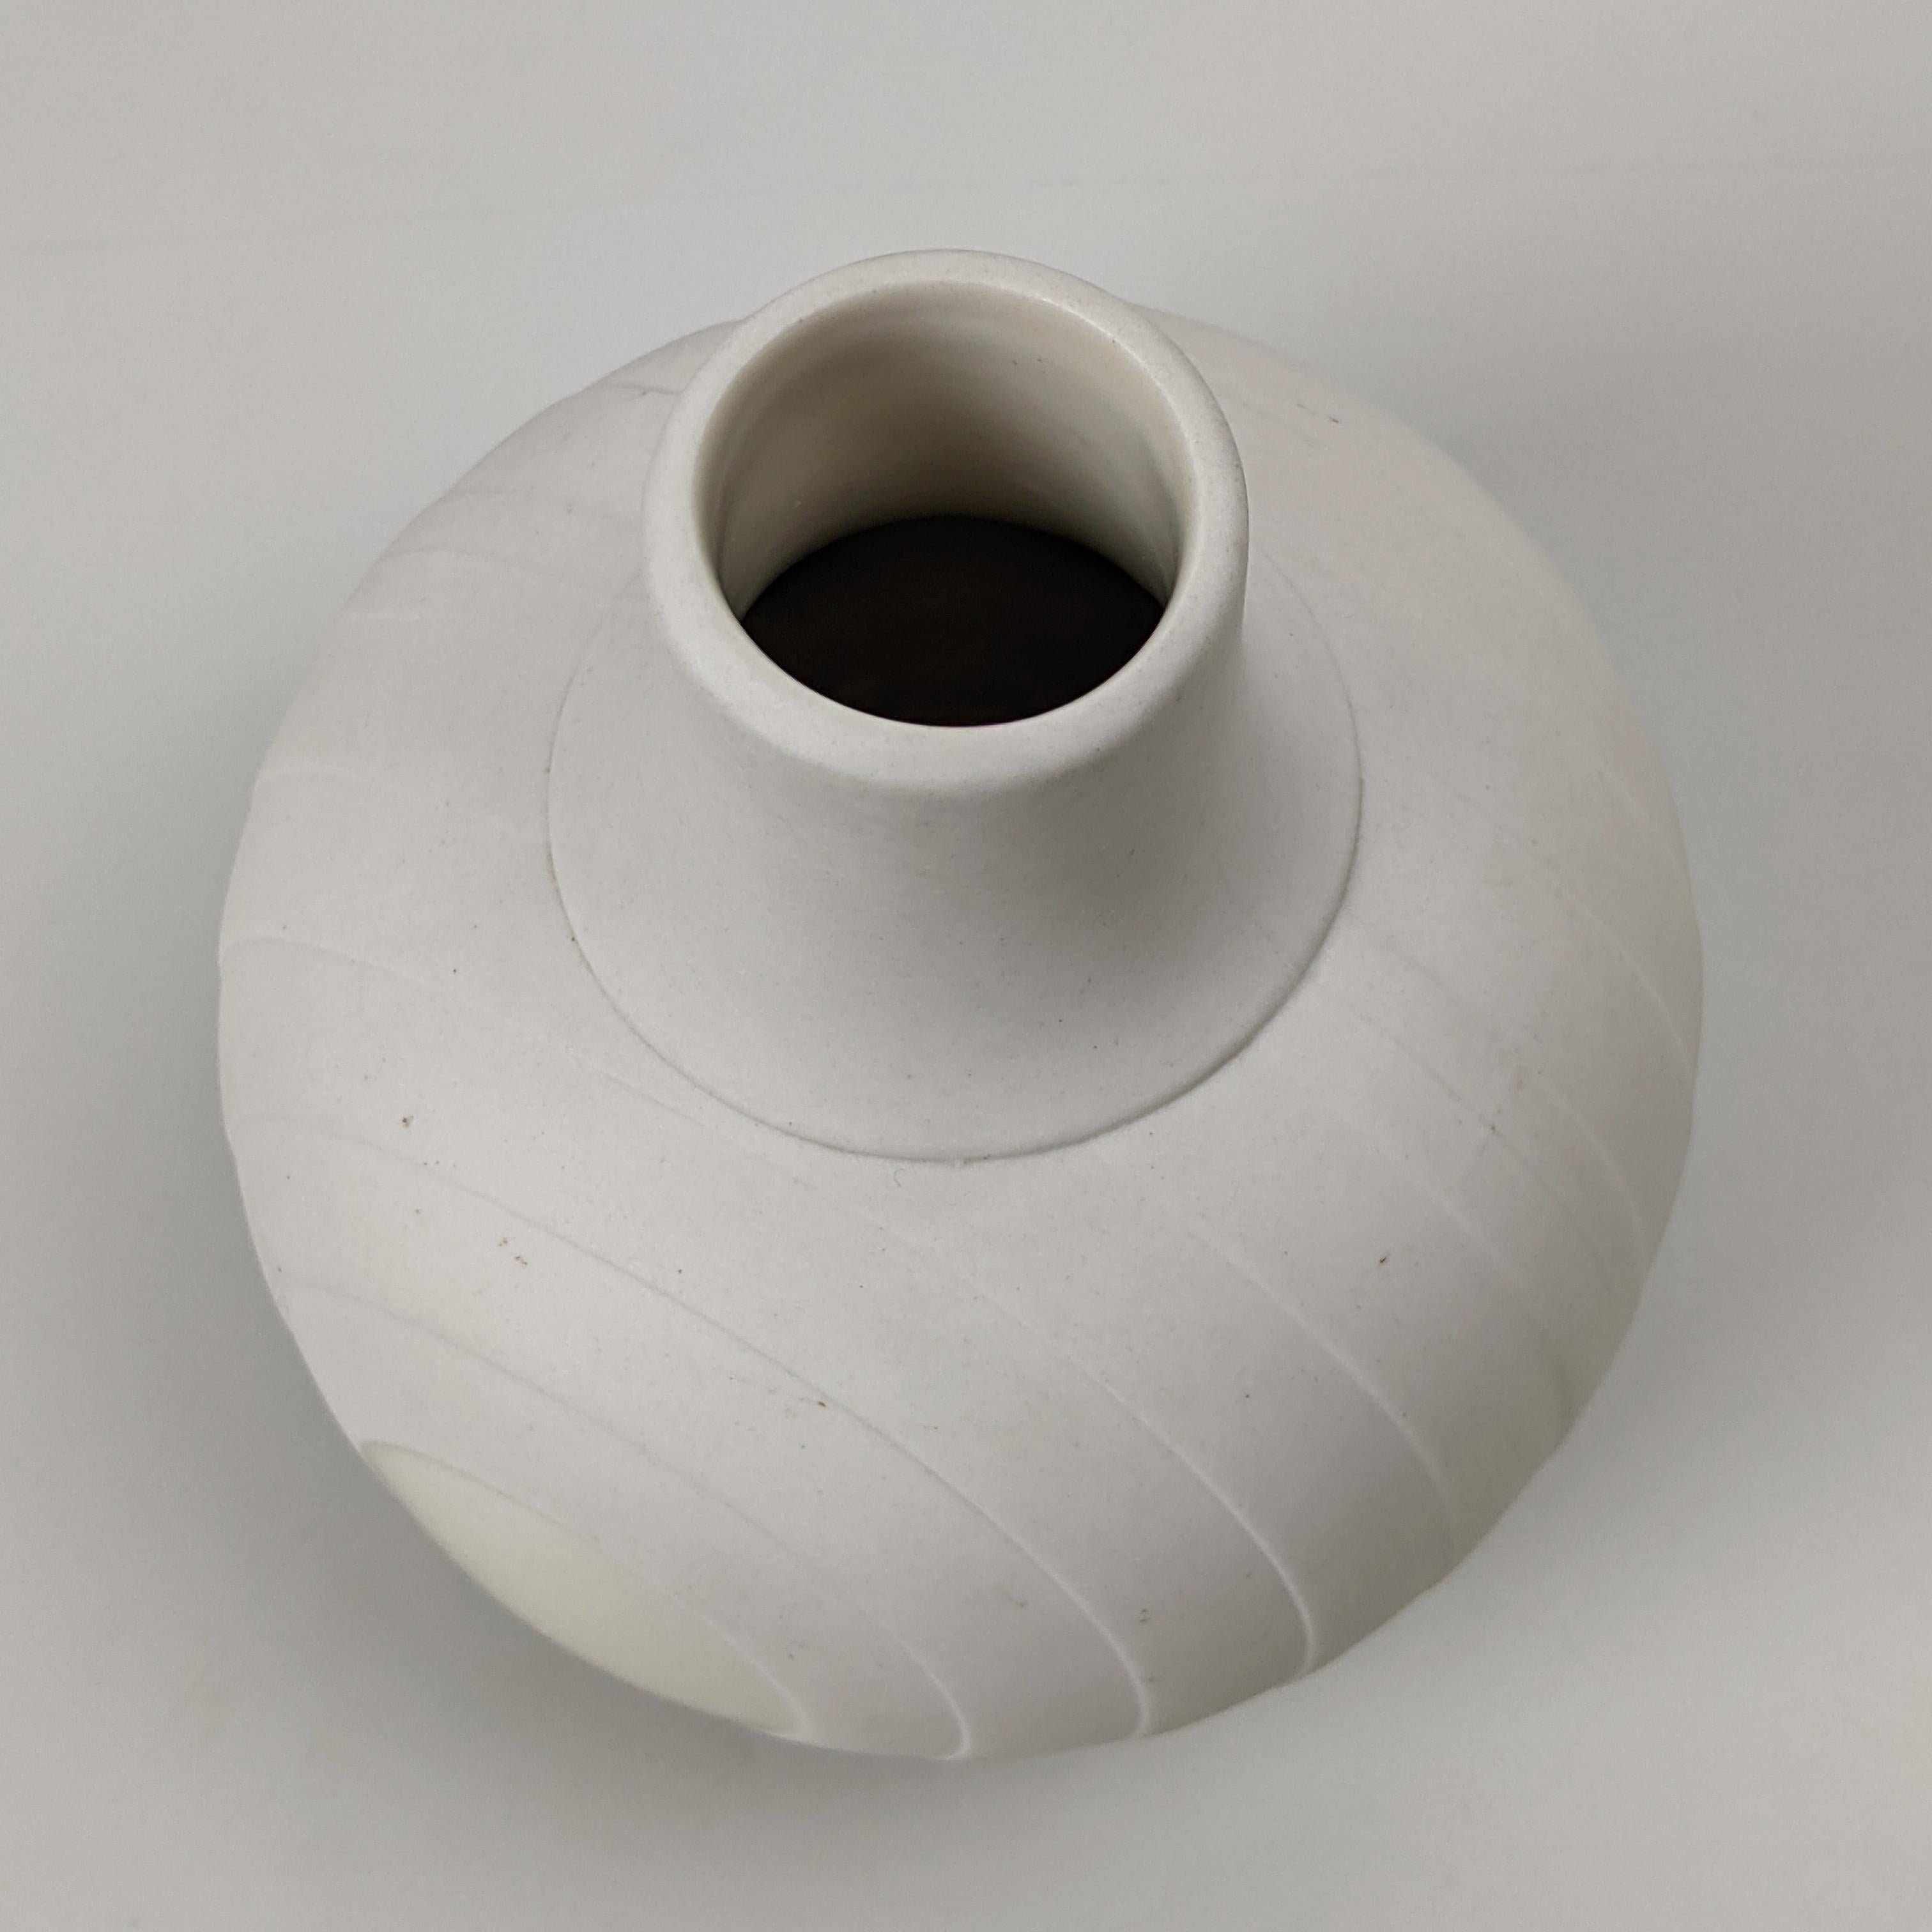 Late 20th Century Hornsea Small Vase from the ‘Concept’ Series, Designed 1977 by Martin Hunt